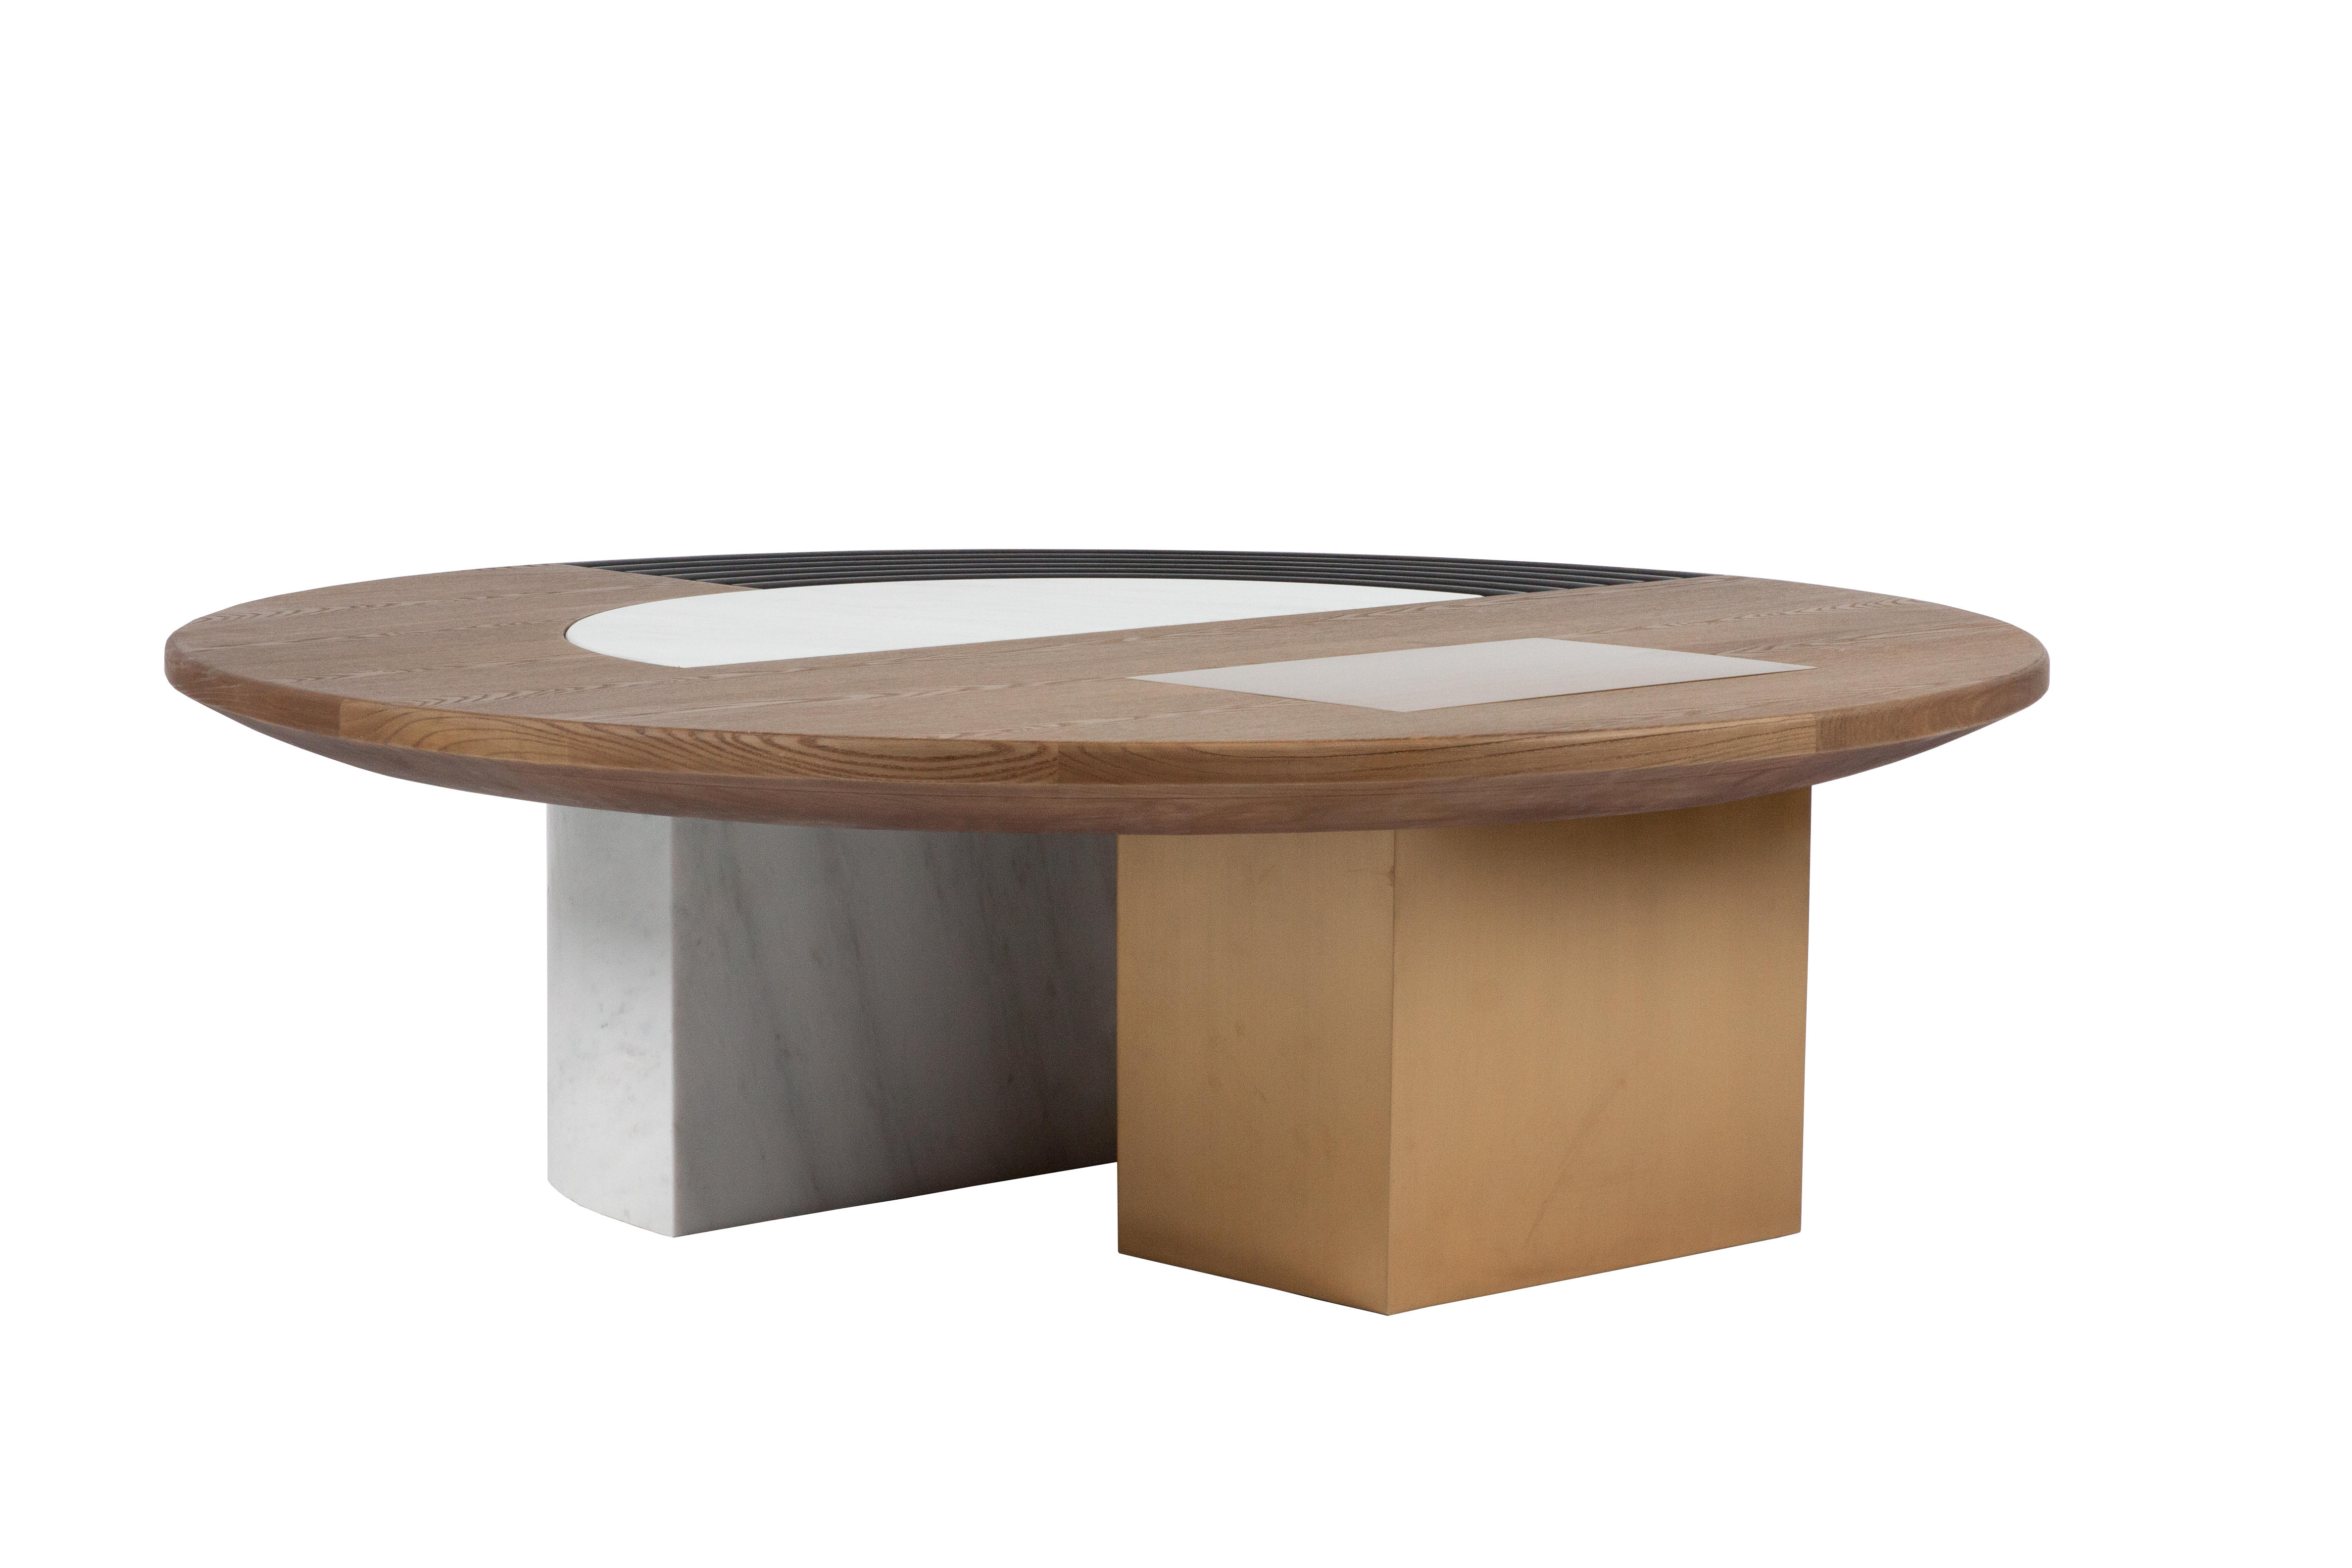 RJT-9708 luxury round oak wood Coffee table with metal base